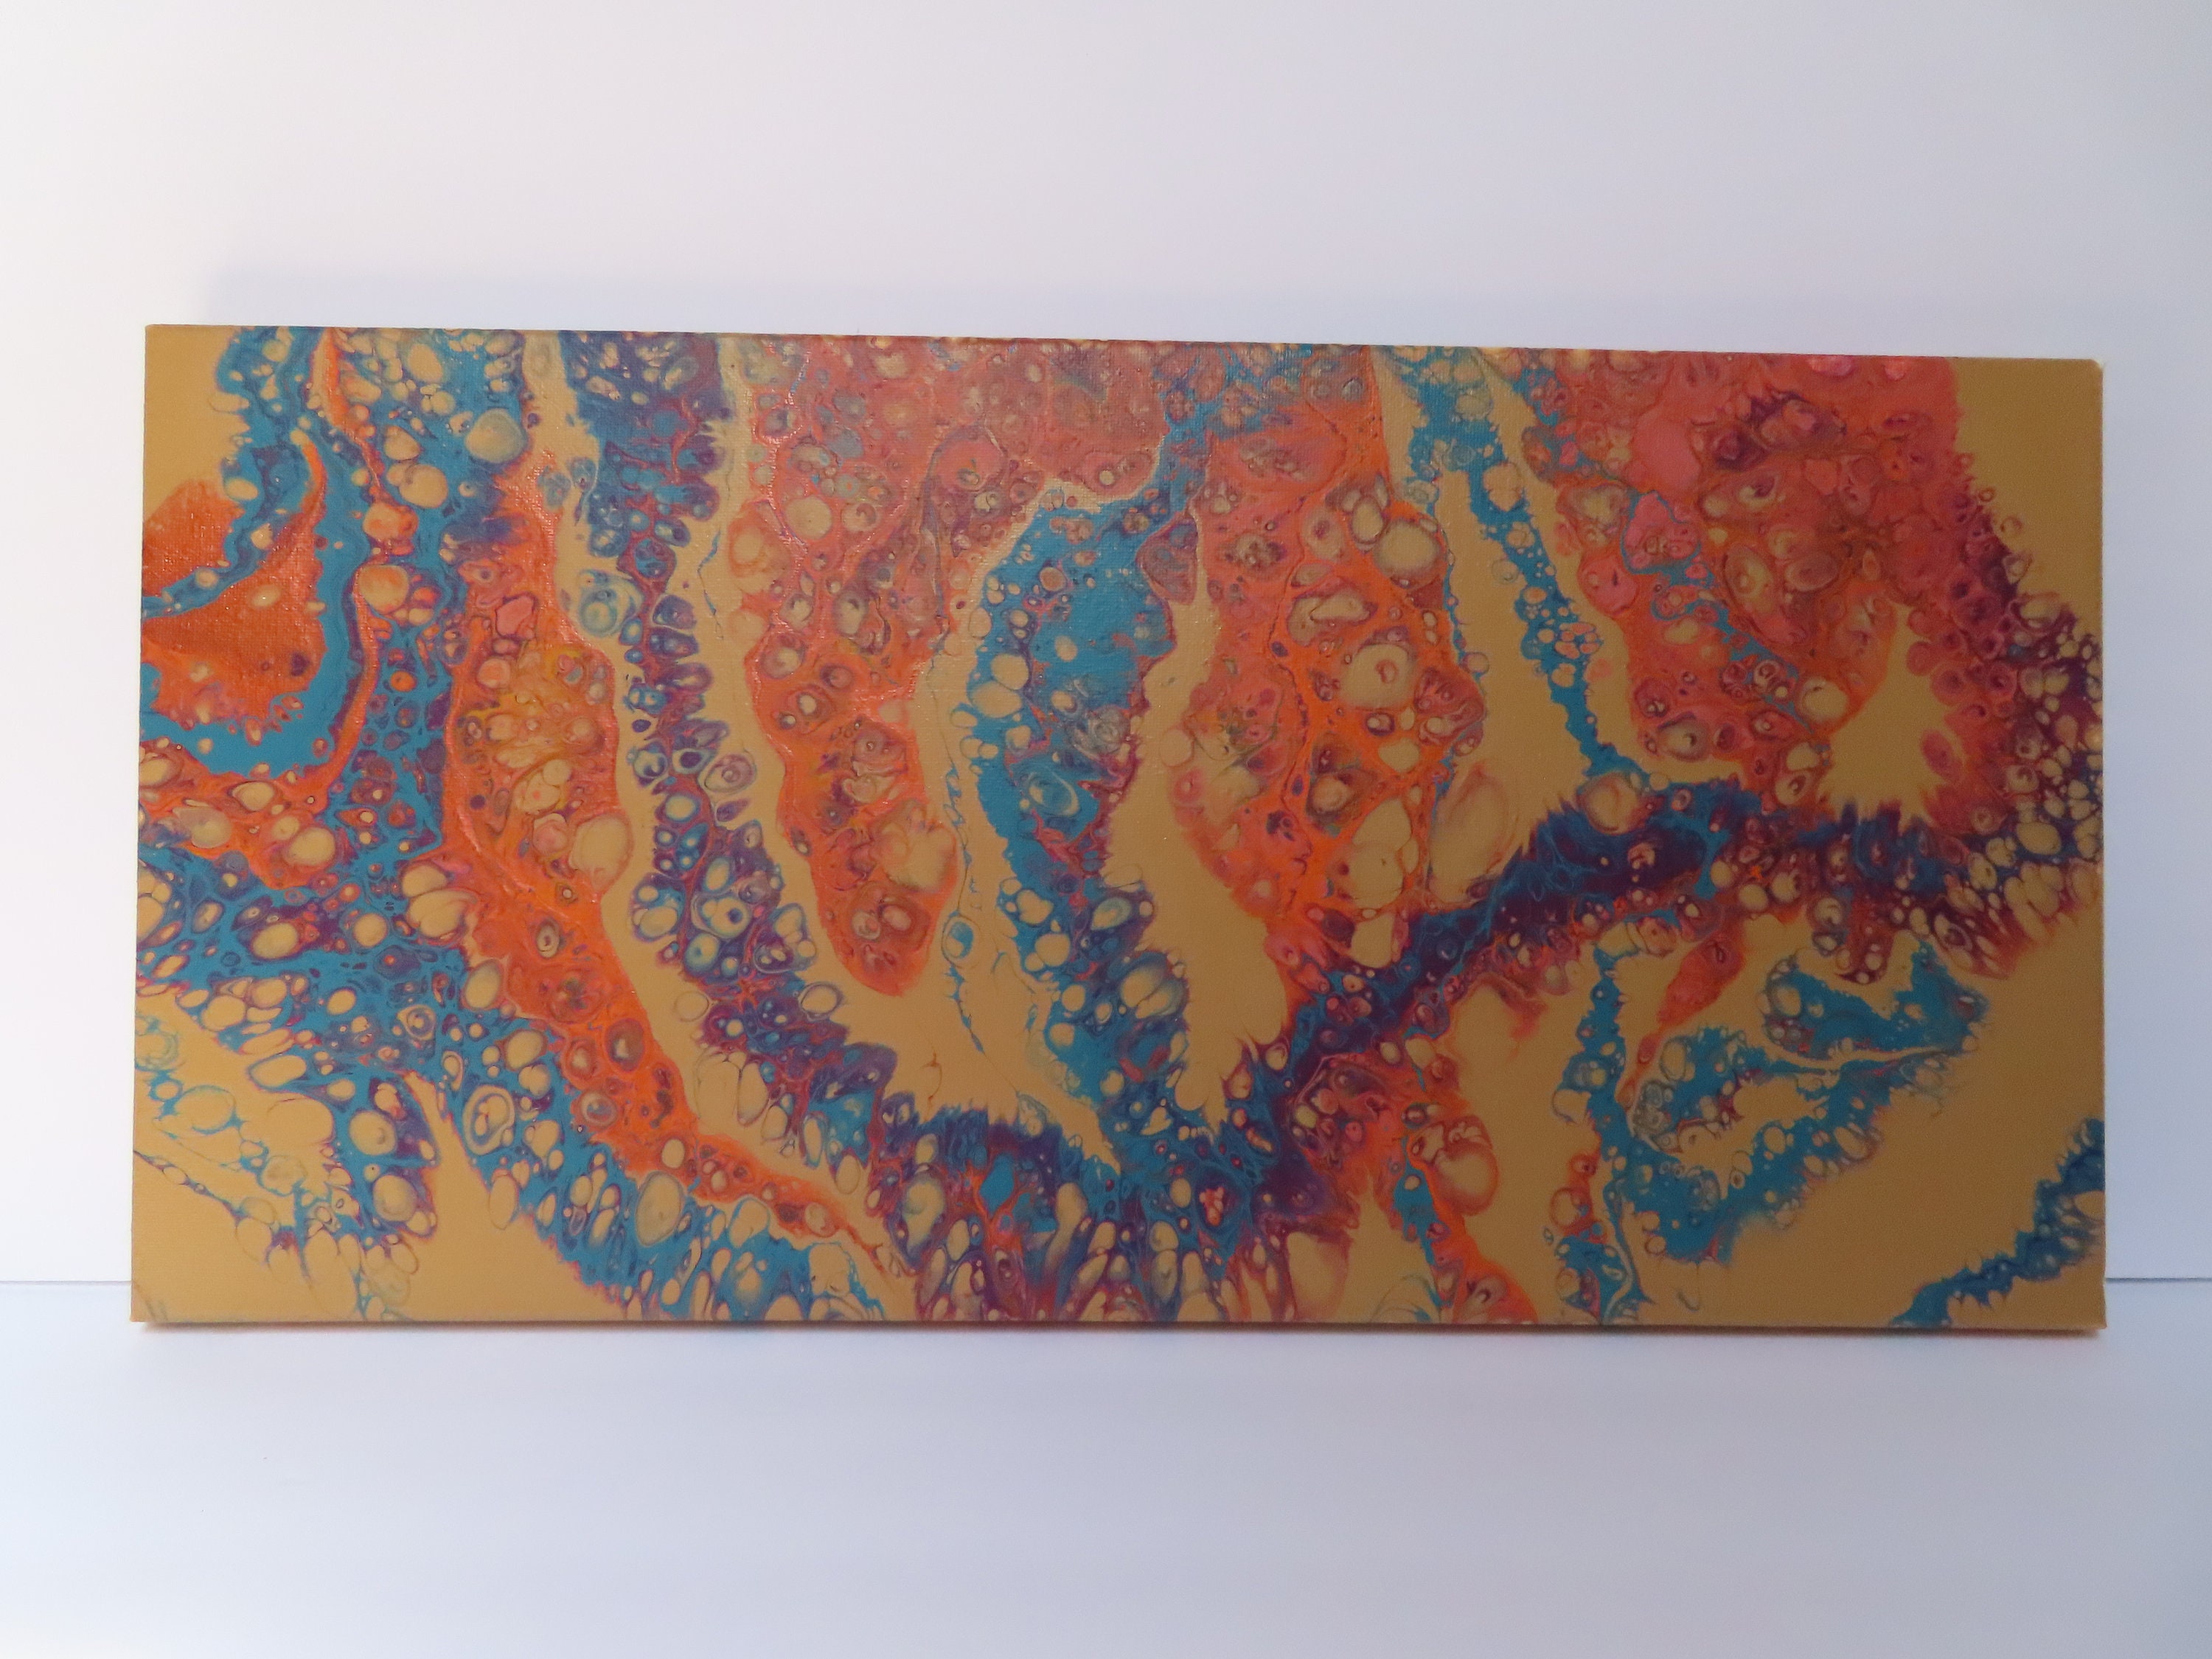 Long 10x20 Inch Stretched Canvas Paint Pour Original Abstract Modern Painting